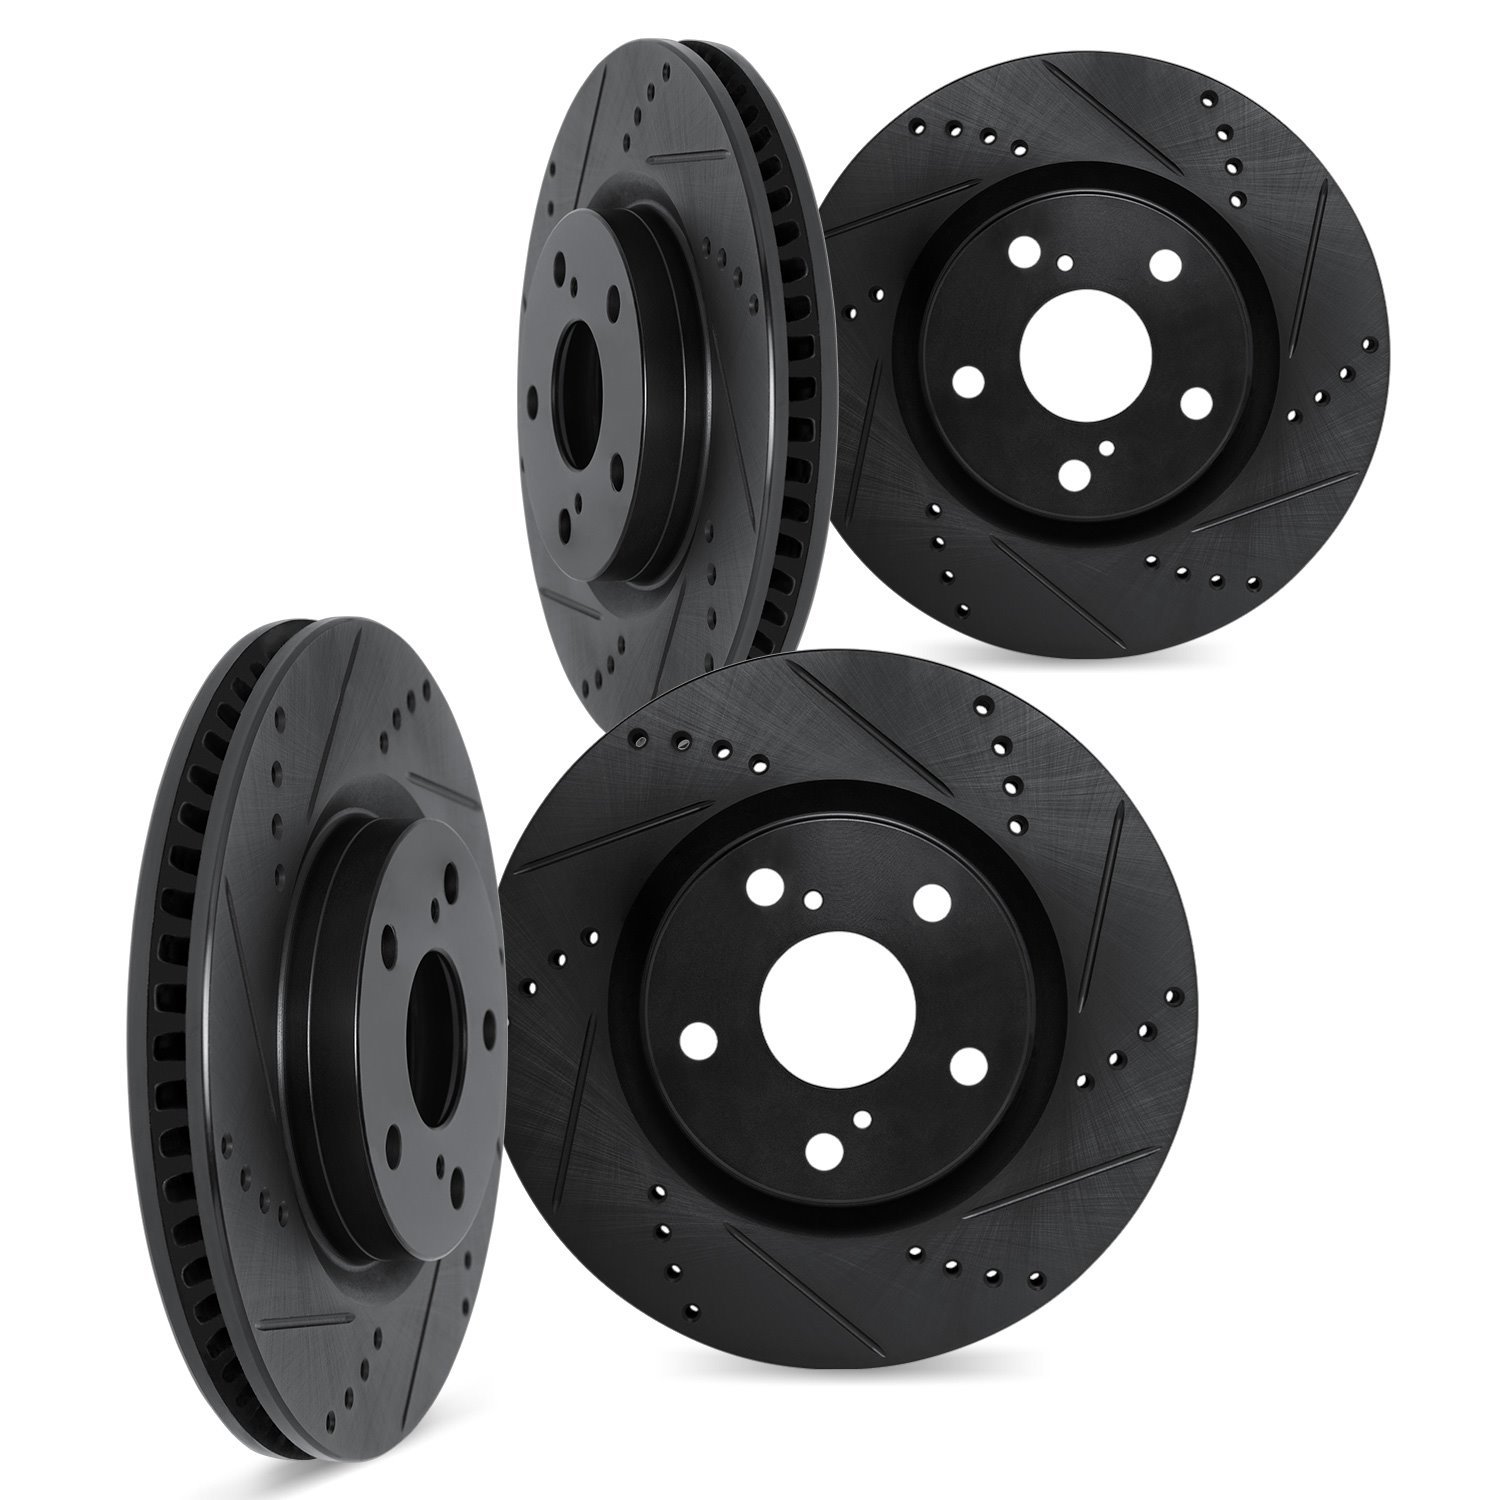 8004-74057 Drilled/Slotted Brake Rotors [Black], 2002-2005 Audi/Volkswagen, Position: Front and Rear